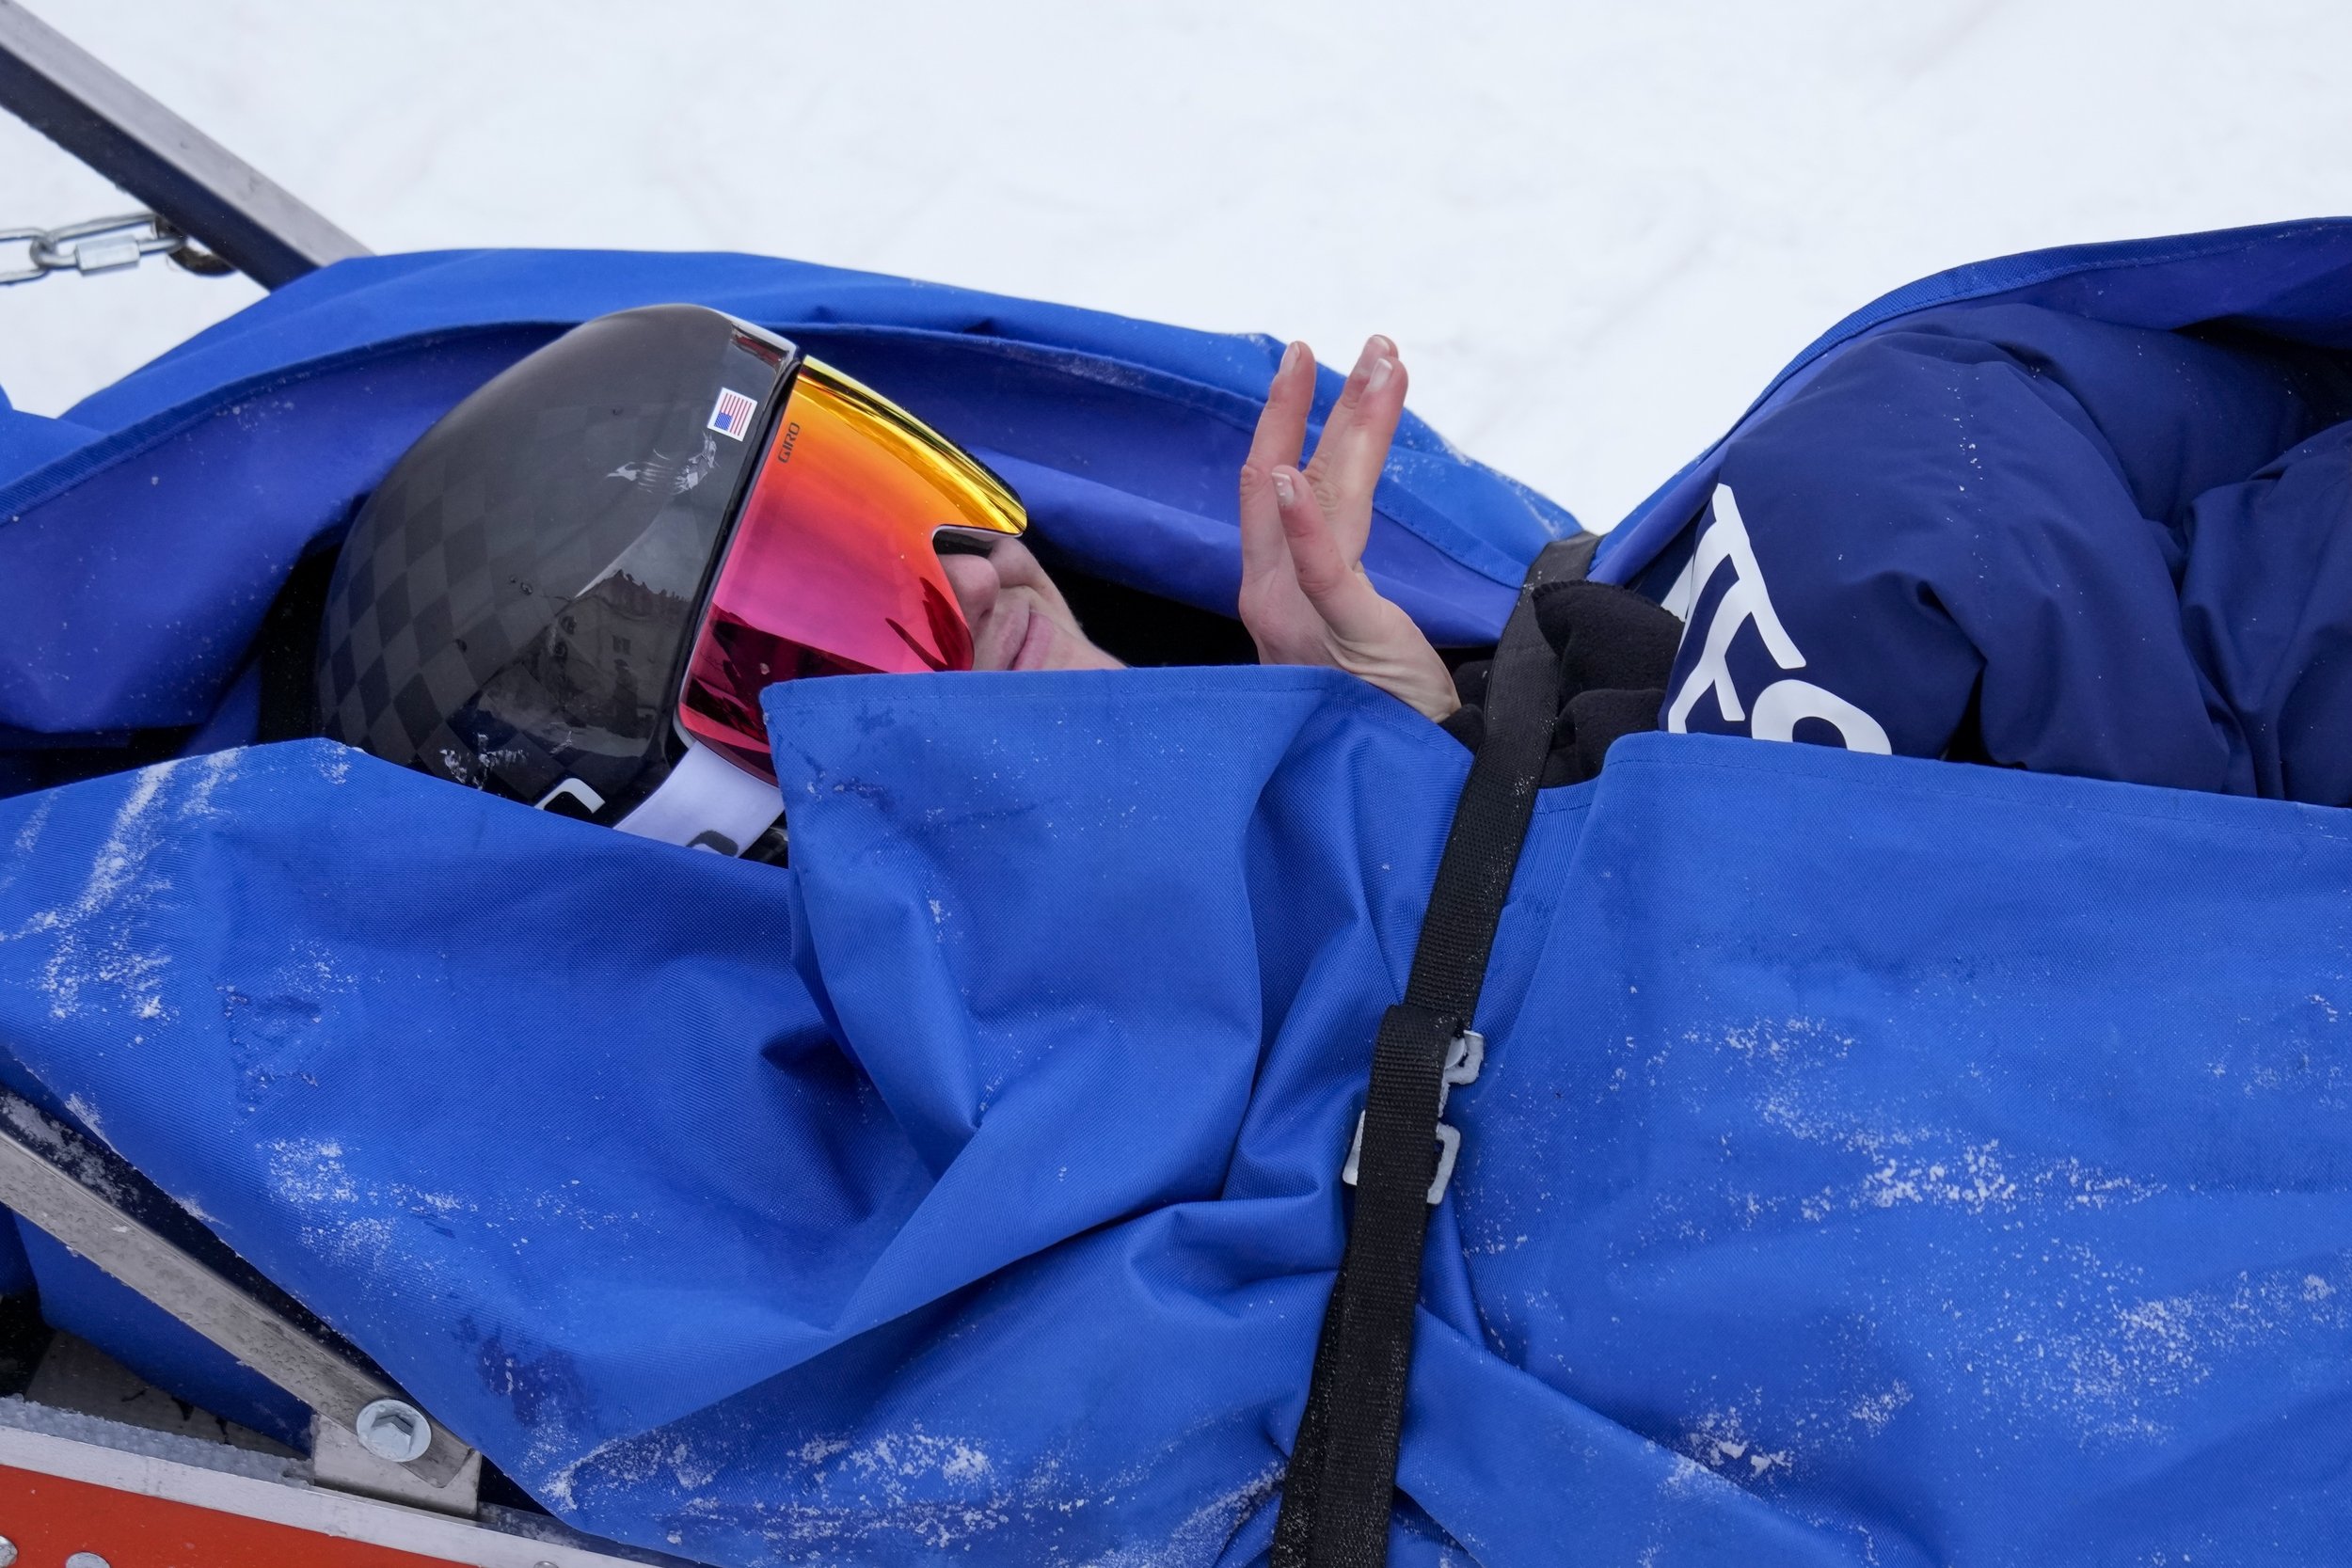  Nina O'Brien of United States is taken on stretcher after falling during the women's giant slalom at the 2022 Winter Olympics, Monday, Feb. 7, 2022, in the Yanqing district of Beijing.(AP Photo/Luca Bruno) 